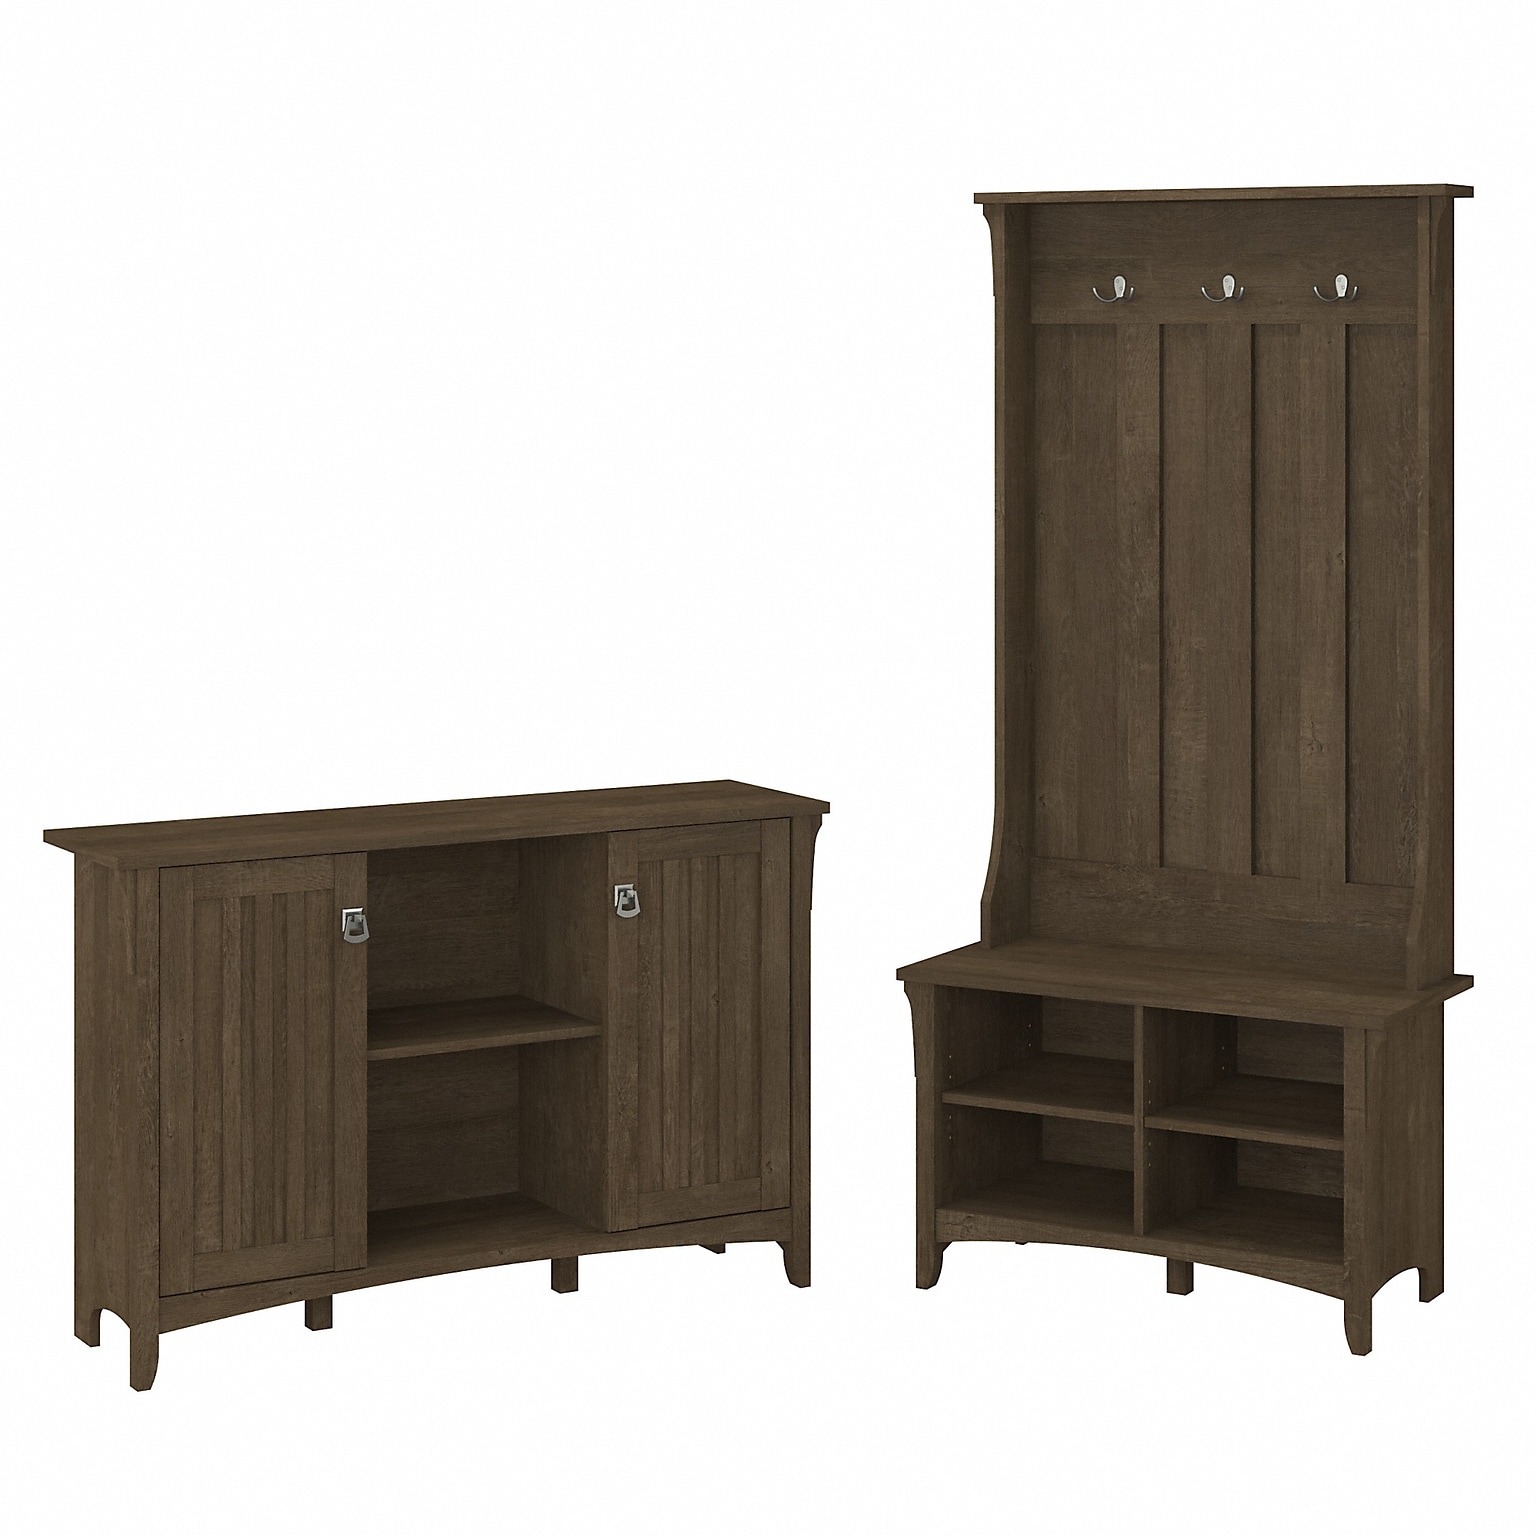 Bush Furniture Salinas 68.11 Storage Set with Hall Tree, Shoe Bench and Accent Cabinet with 5 Shelves, Ash Brown (SAL008ABR)